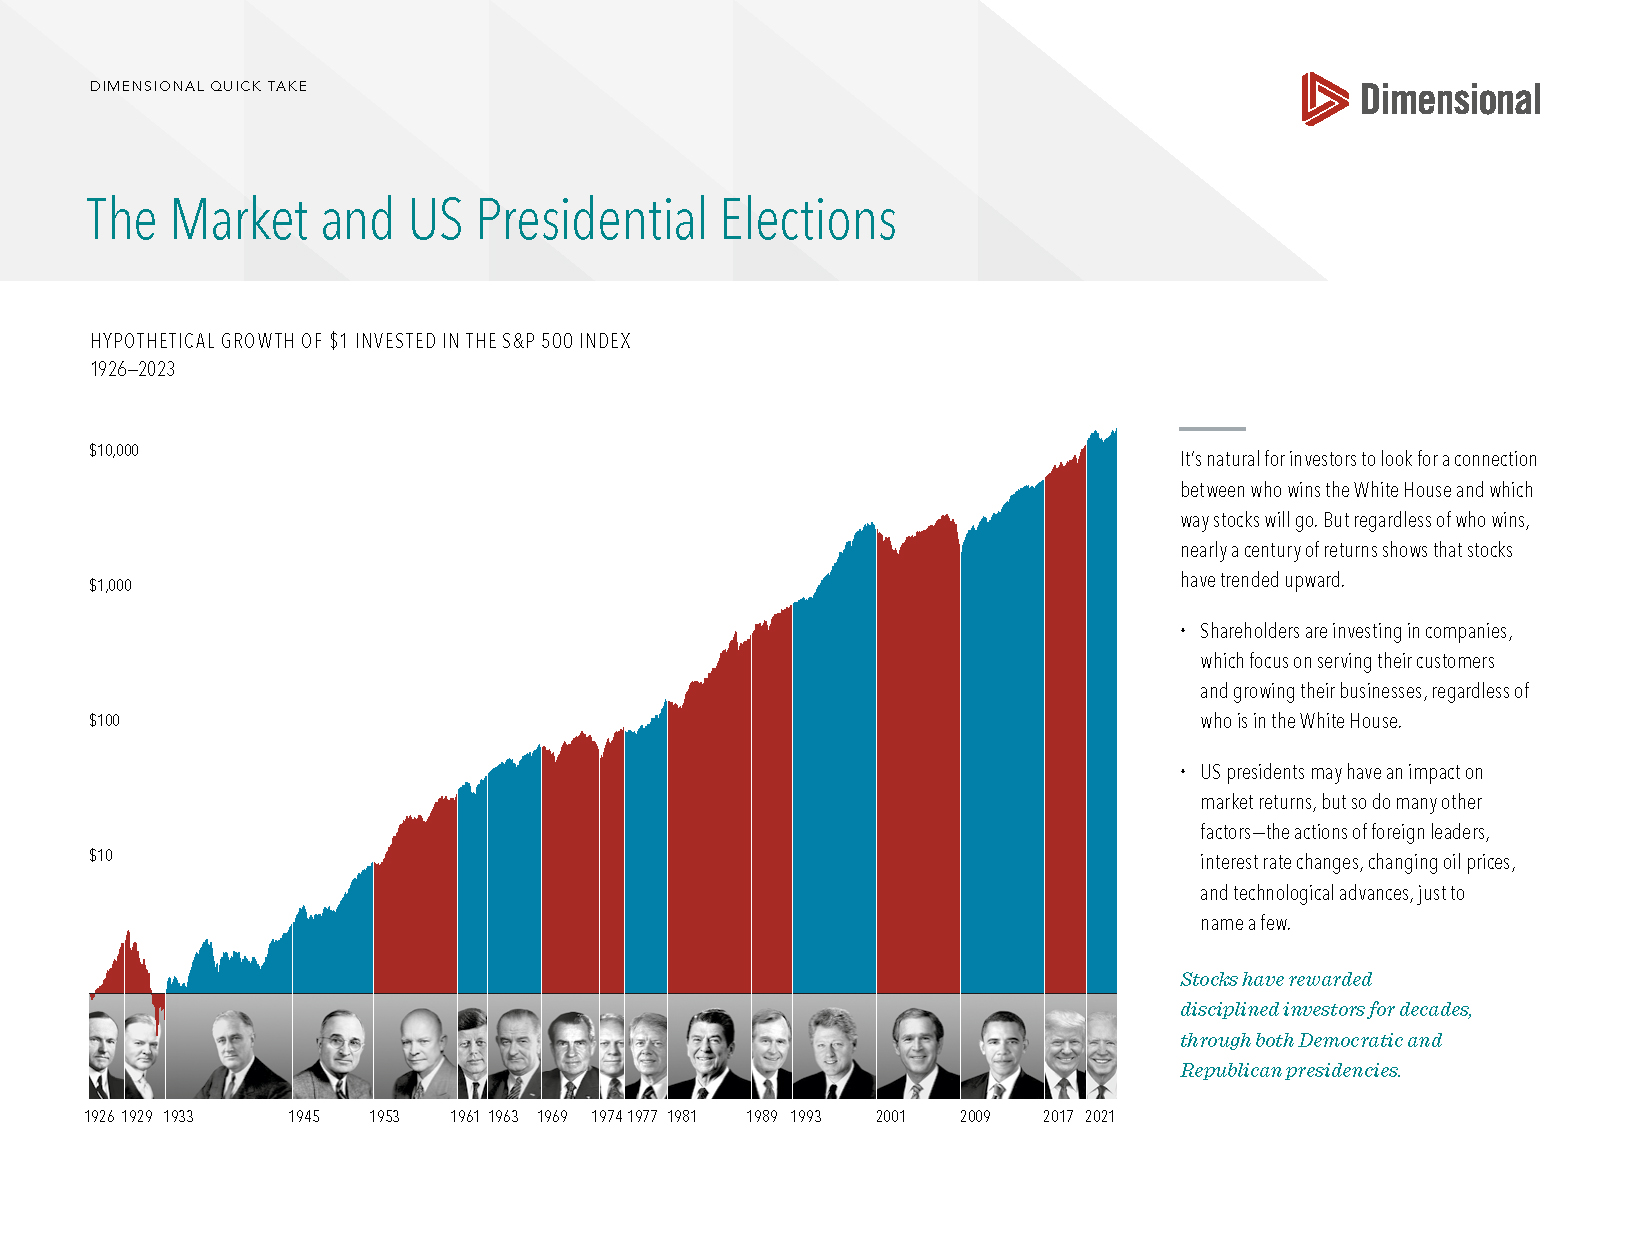 A chart from Dimensional on the connection between the stock market and U.S. presidents.